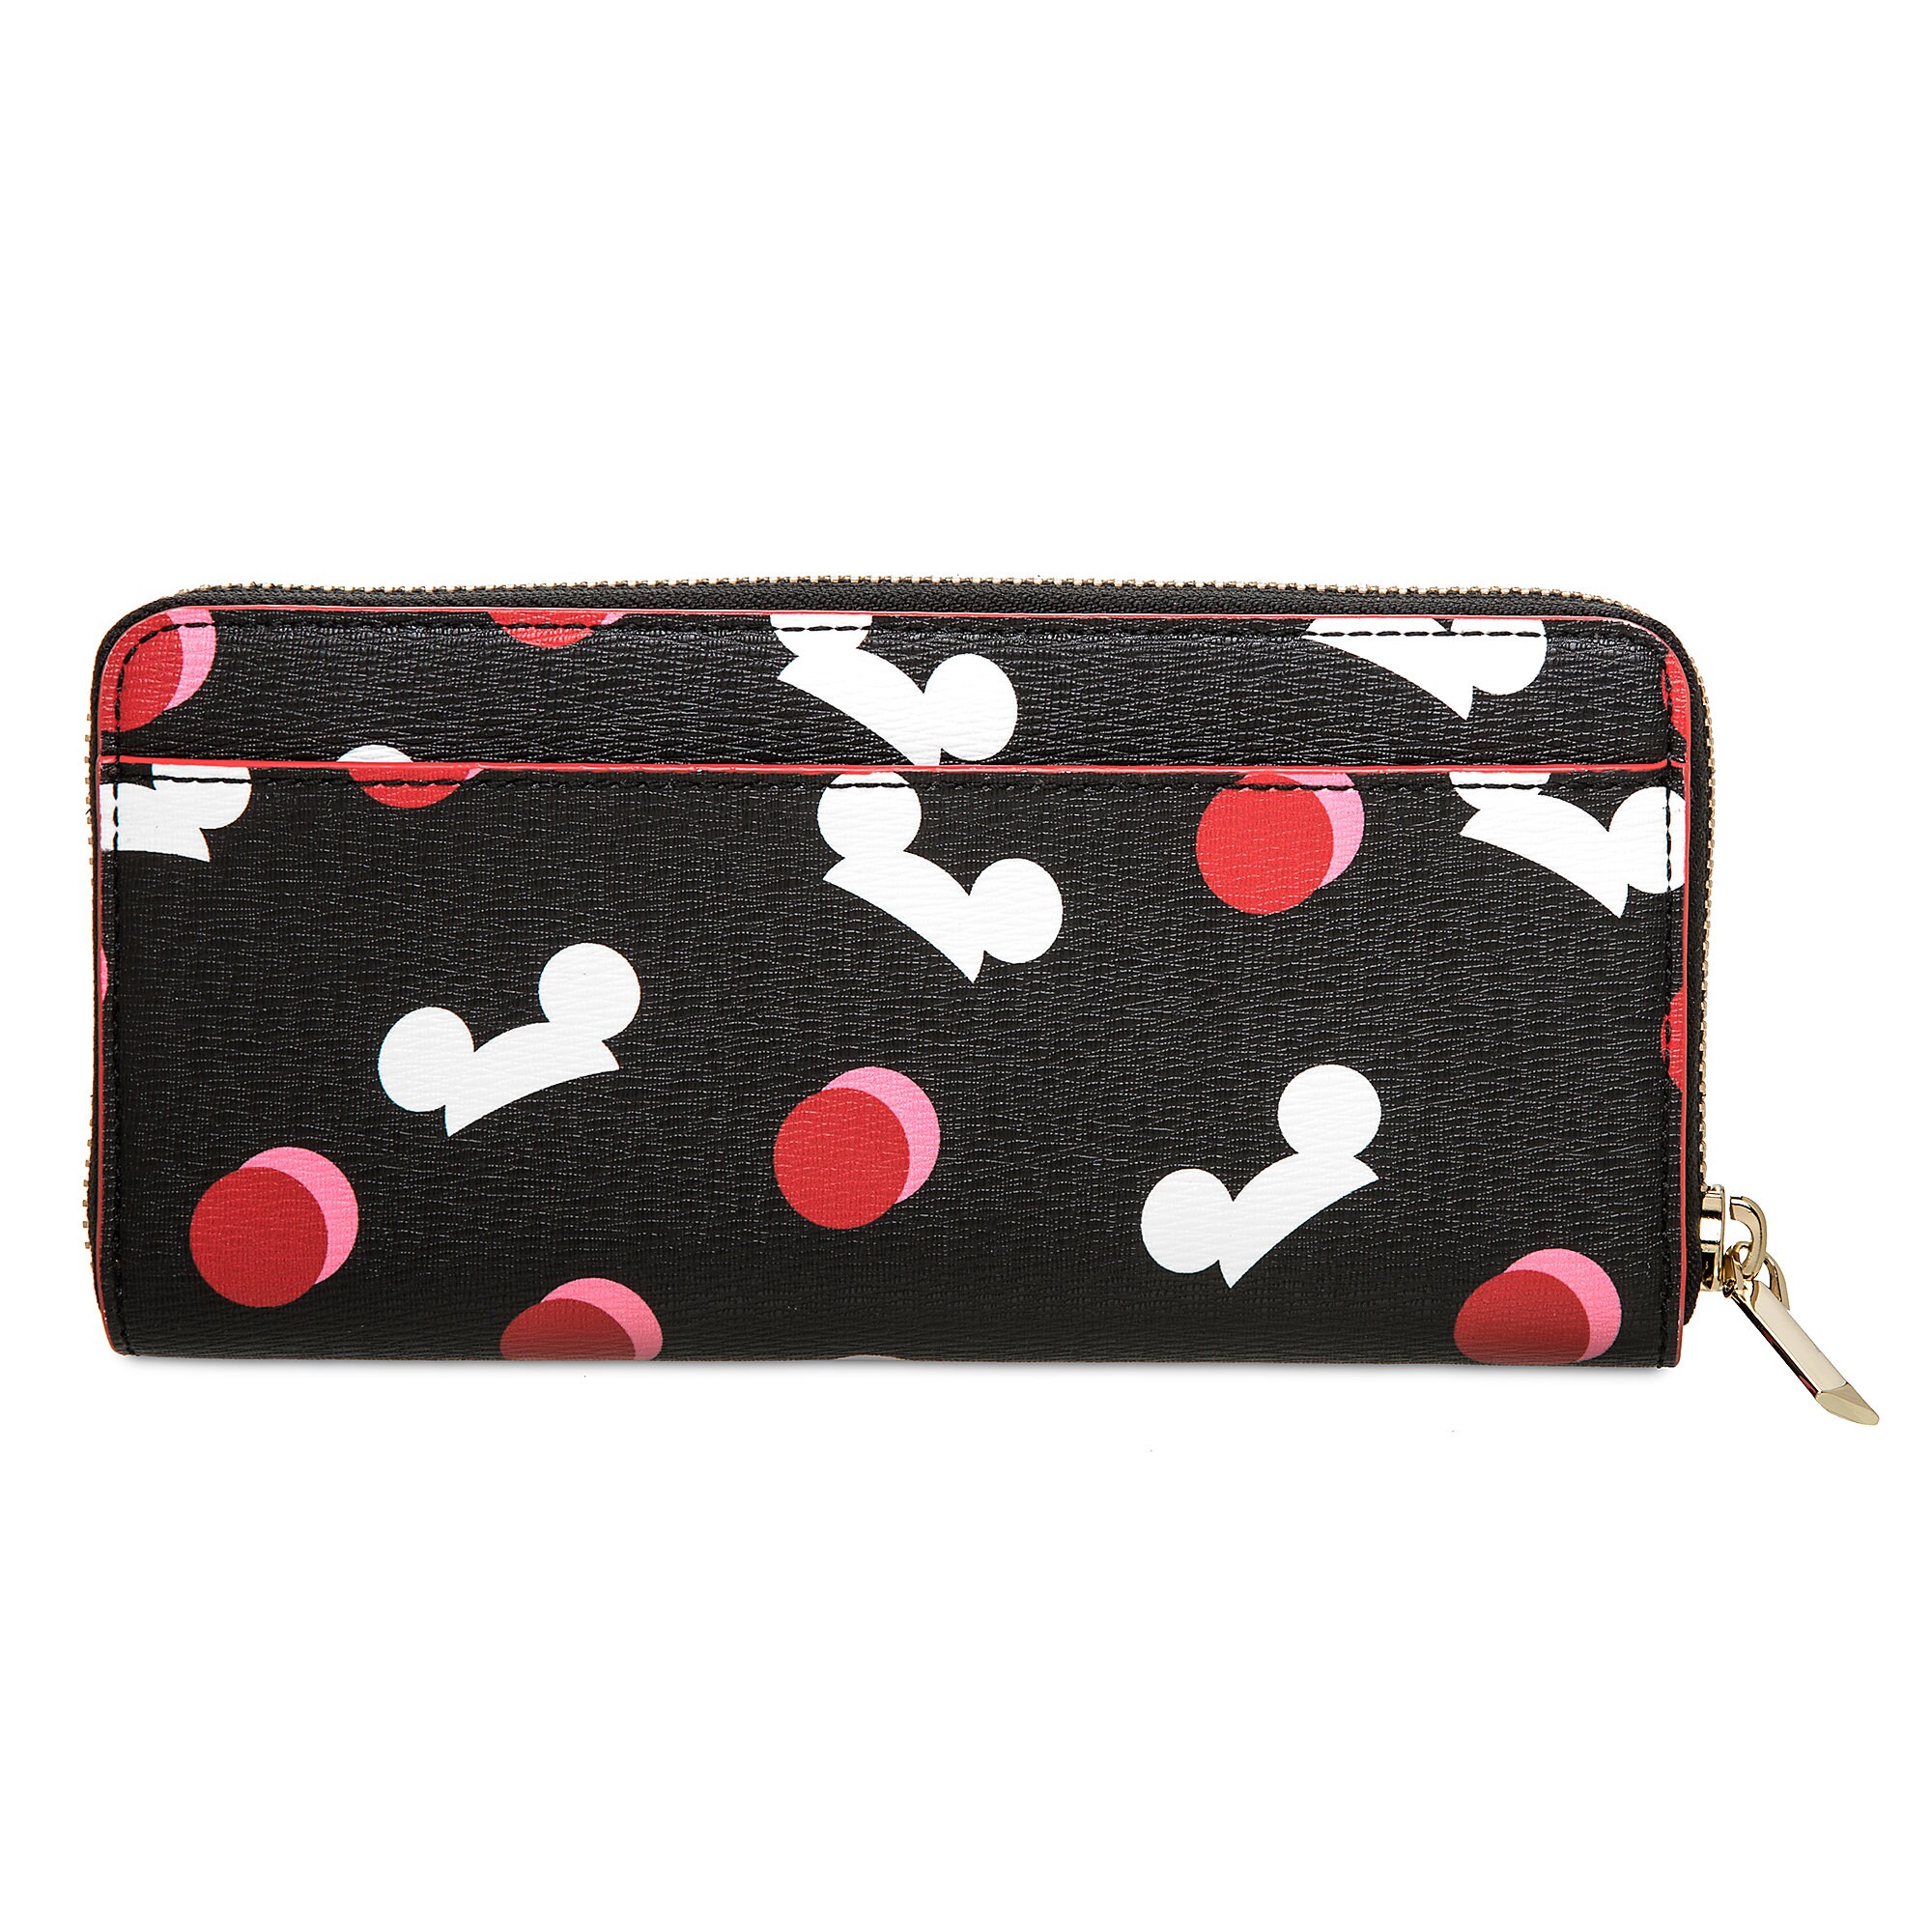 Mickey Mouse Ear Hat Wallet by kate spade new york - Black